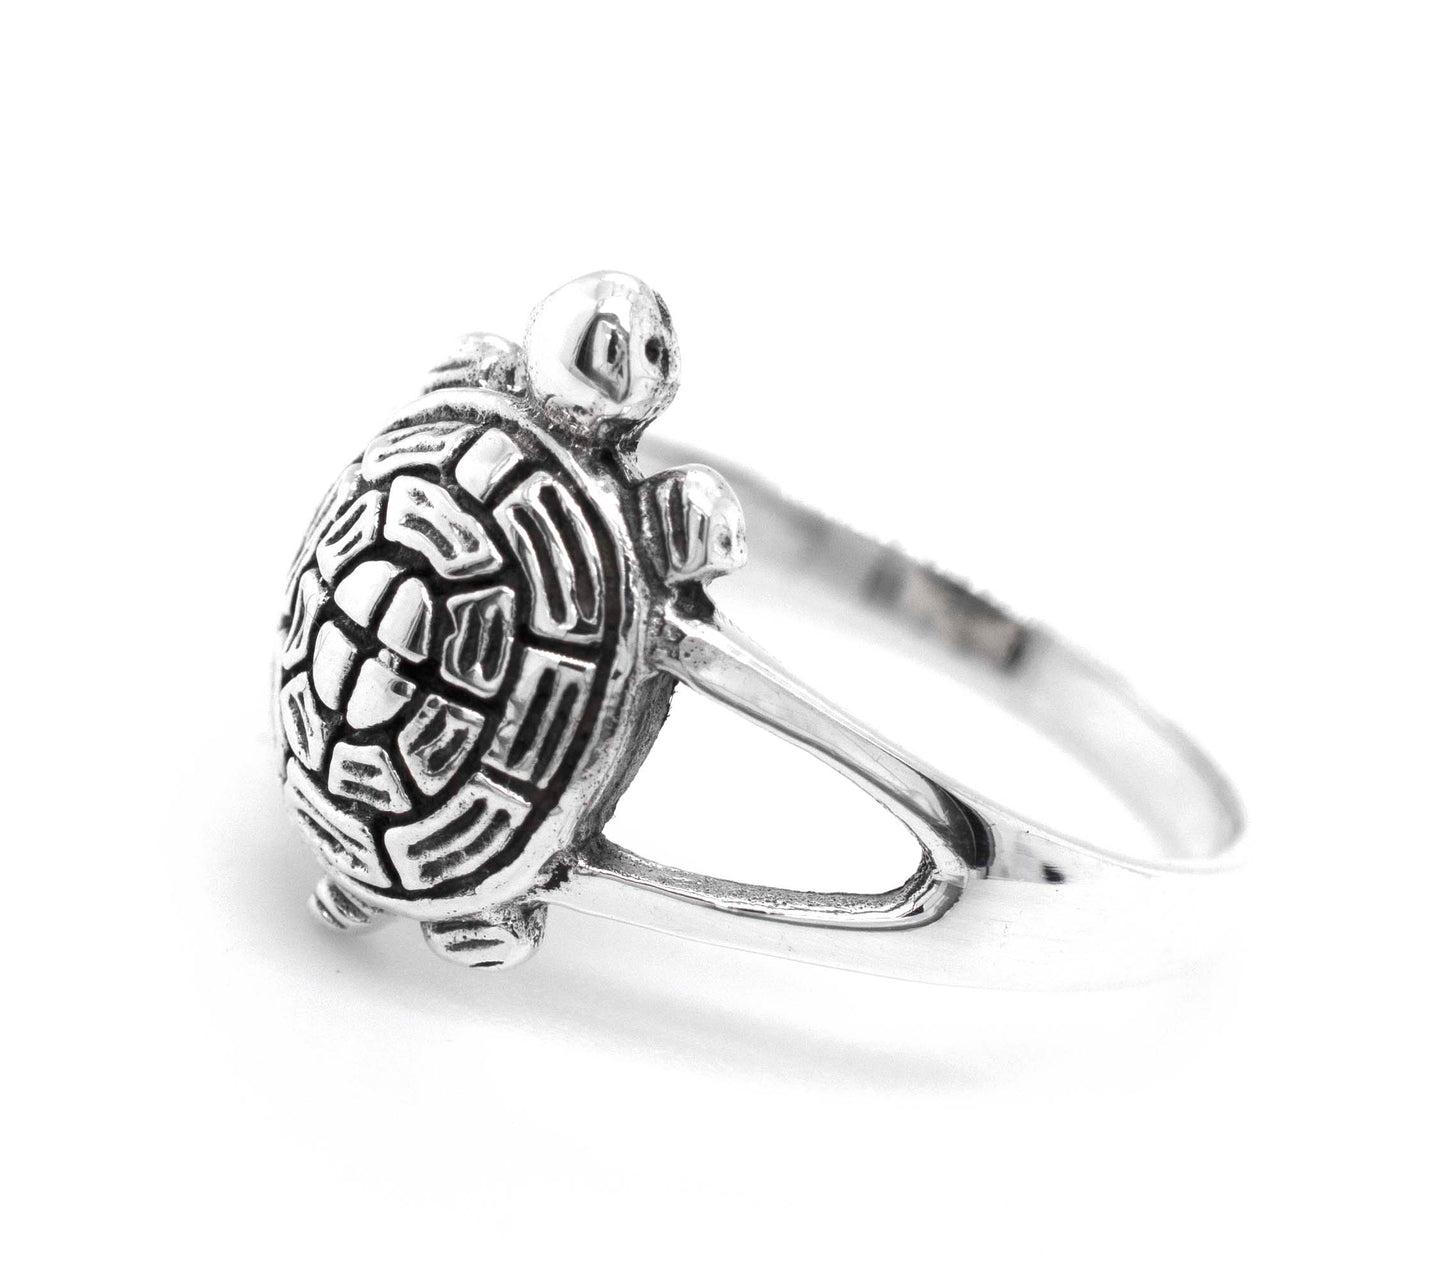 A reptile-inspired Turtle Ring on a white background.